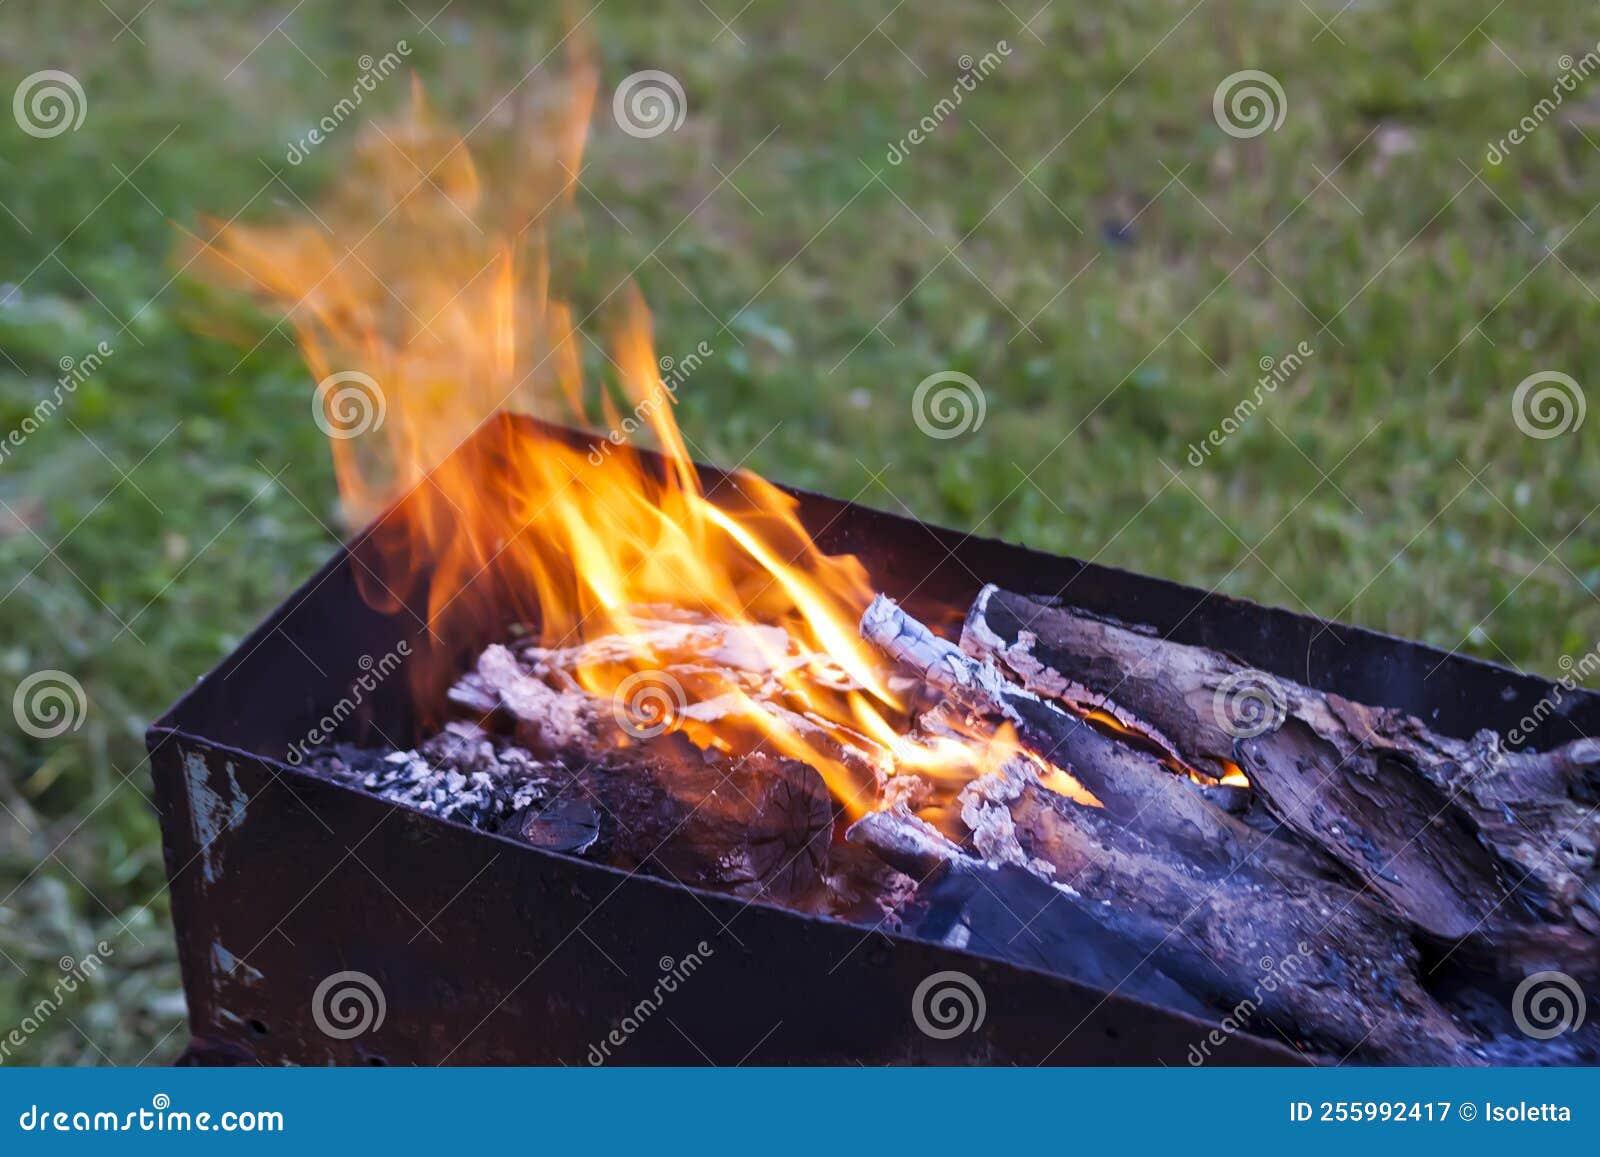 Flame of Fire Burning in the Brazier Stock Image - Image of brazier ...